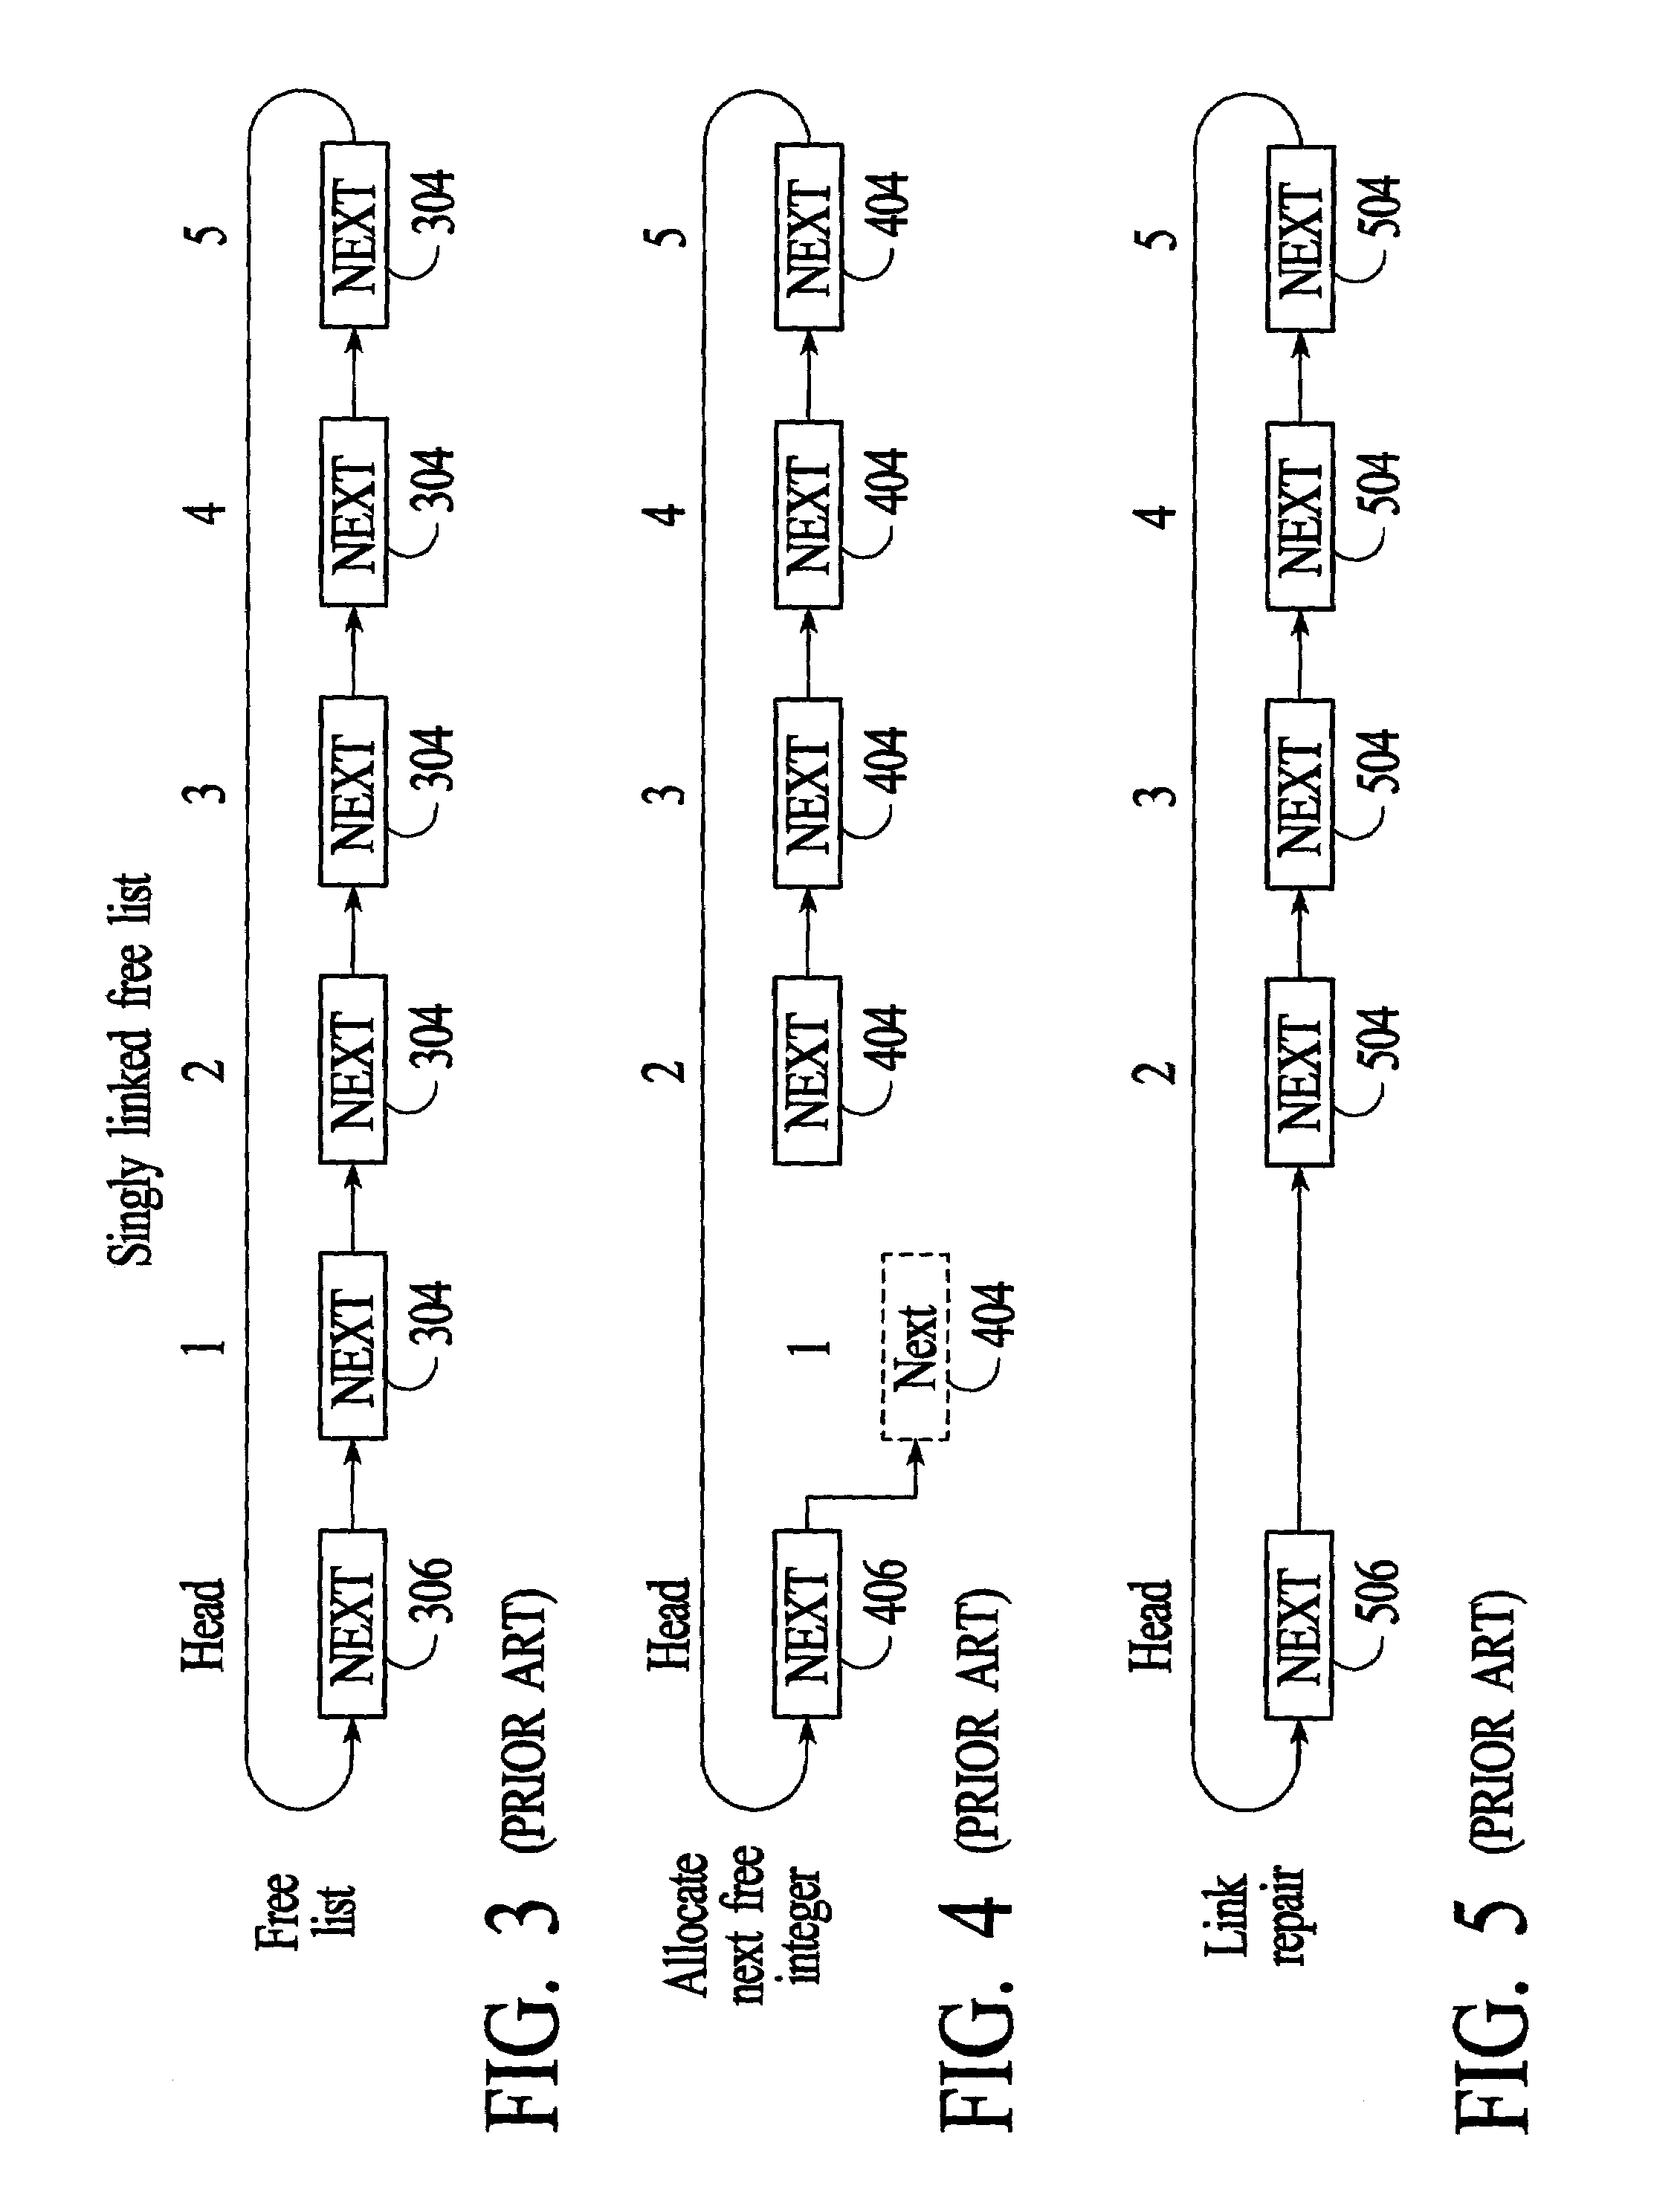 Method, system, and computer program product for managing a re-usable resource with linked list groups